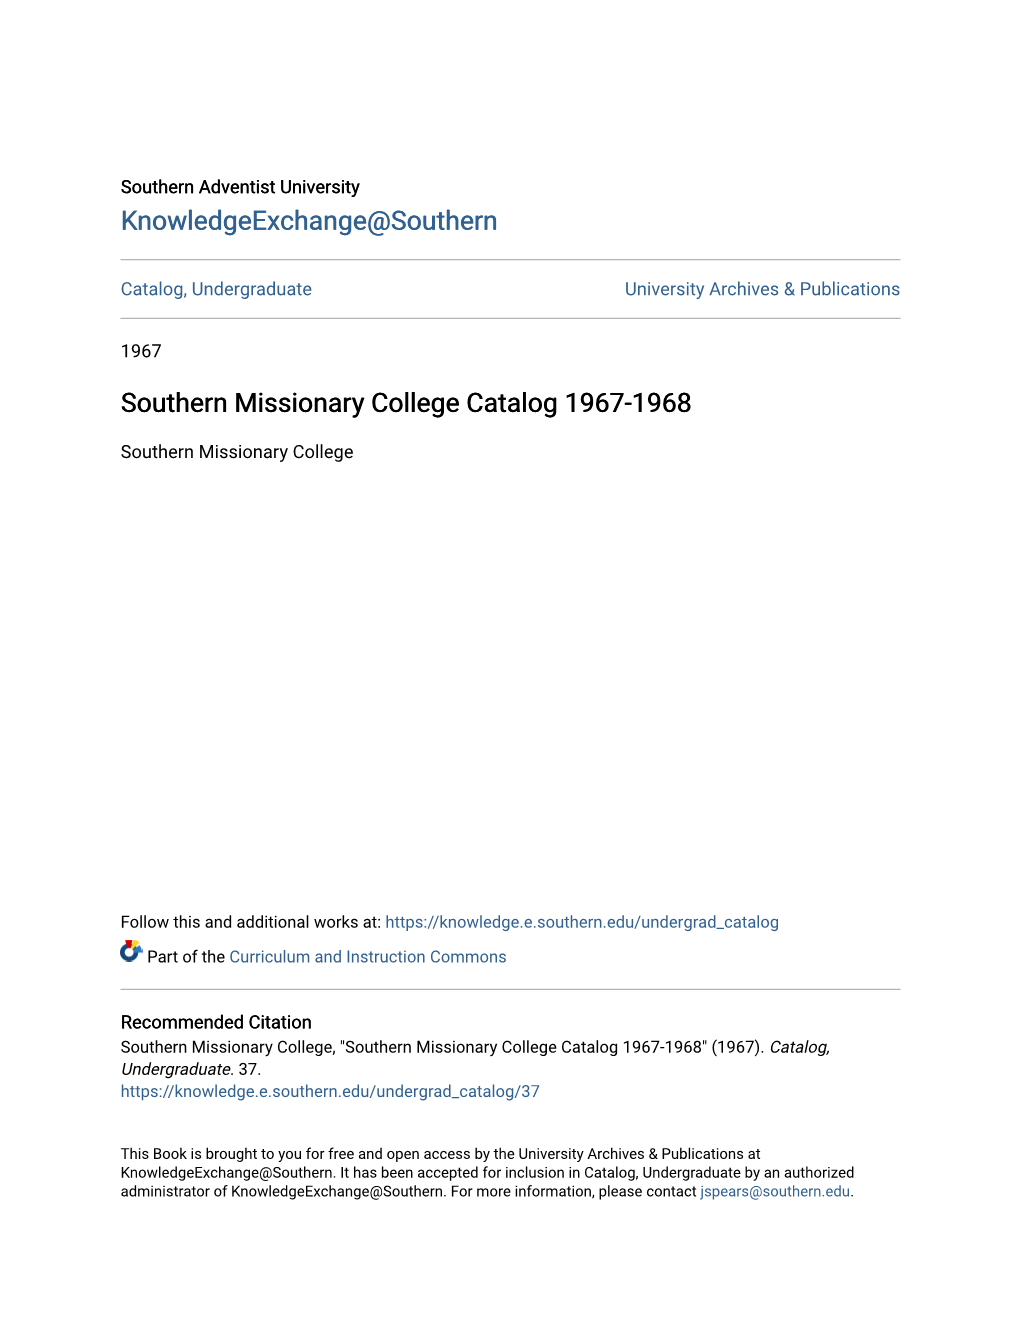 Southern Missionary College Catalog 1967-1968